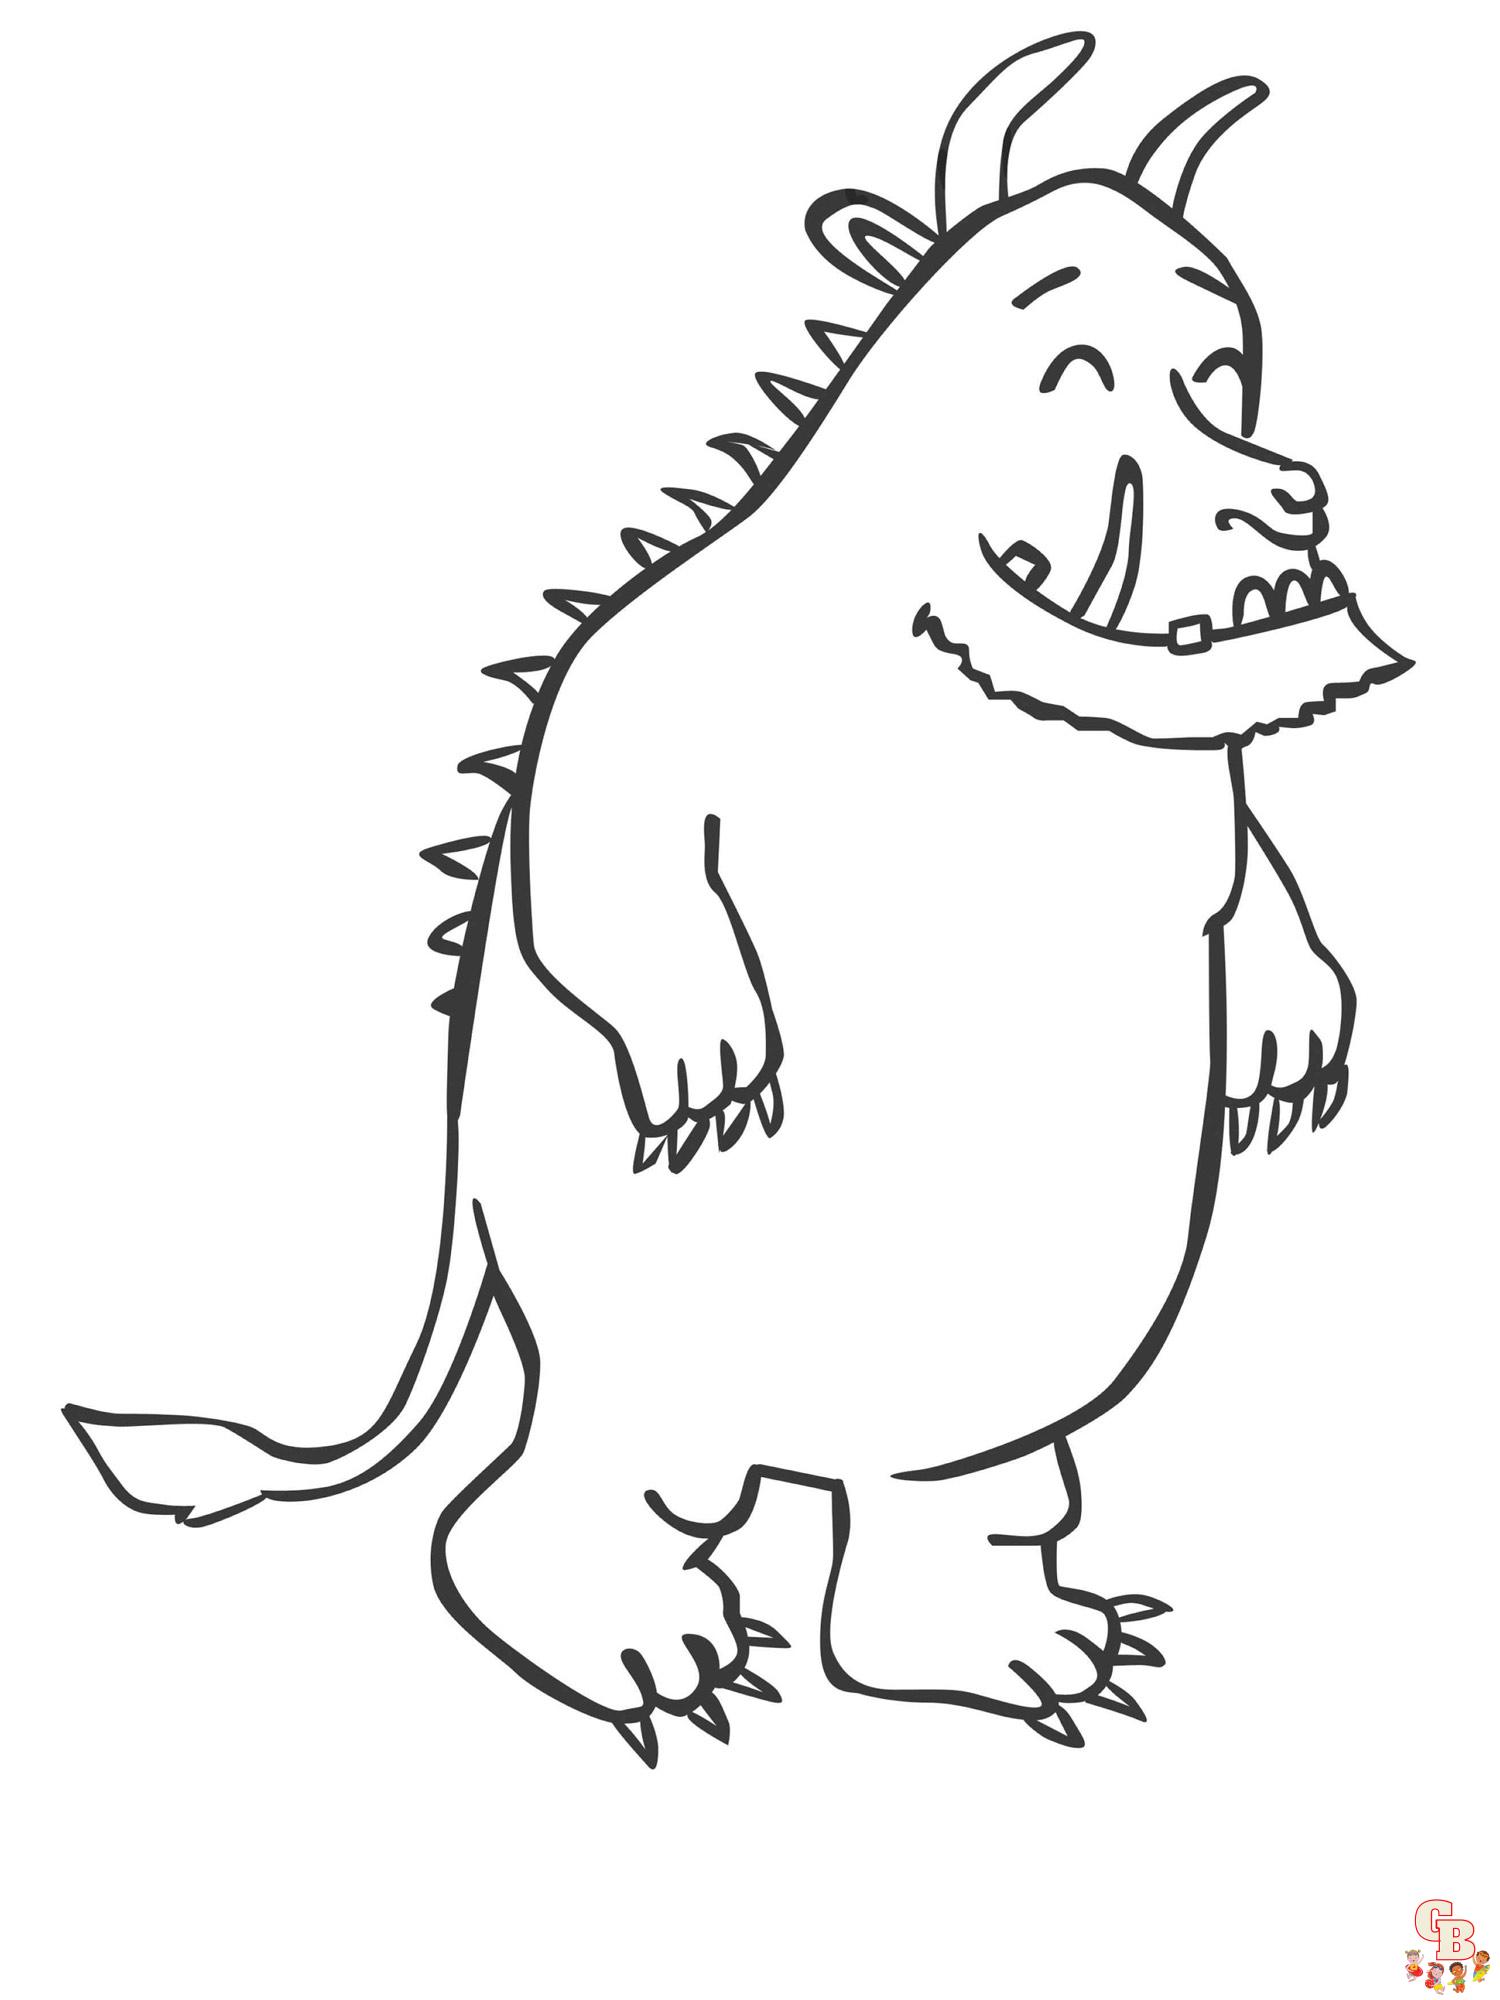 Gruffalo Coloring Pages 3